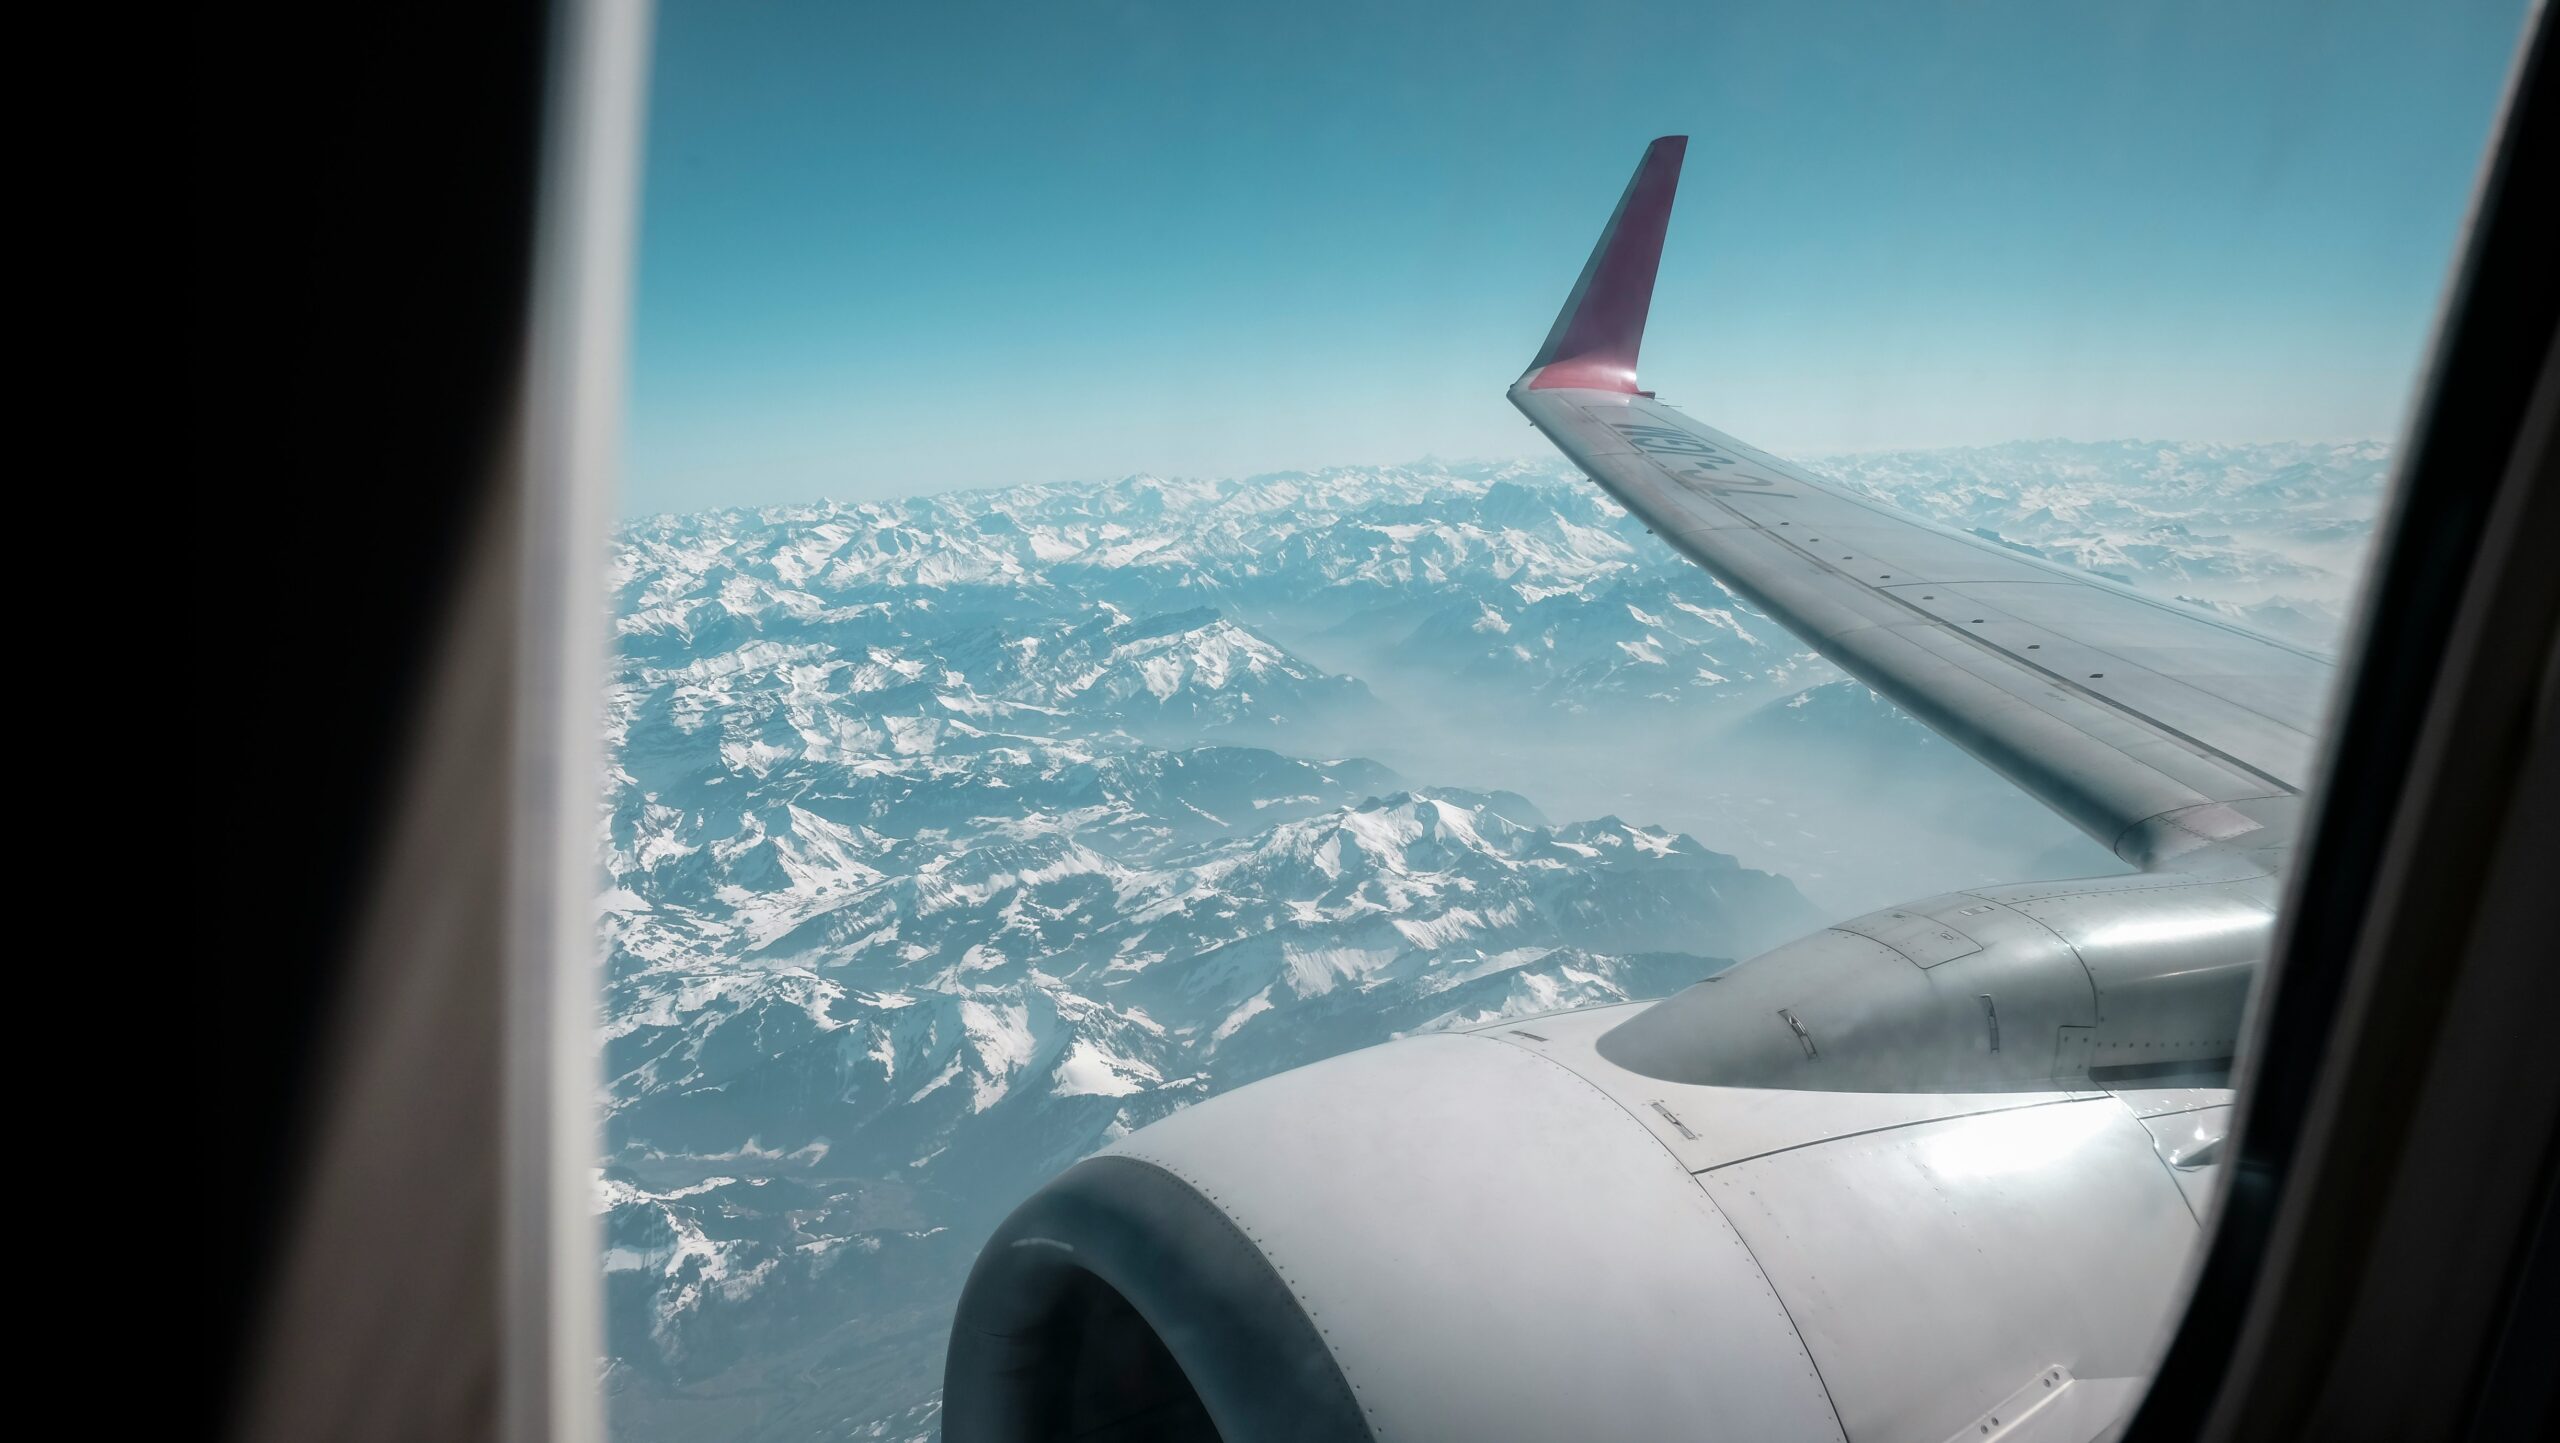 Aerial view of mountains through airplane window, highlighting aircraft insurance.